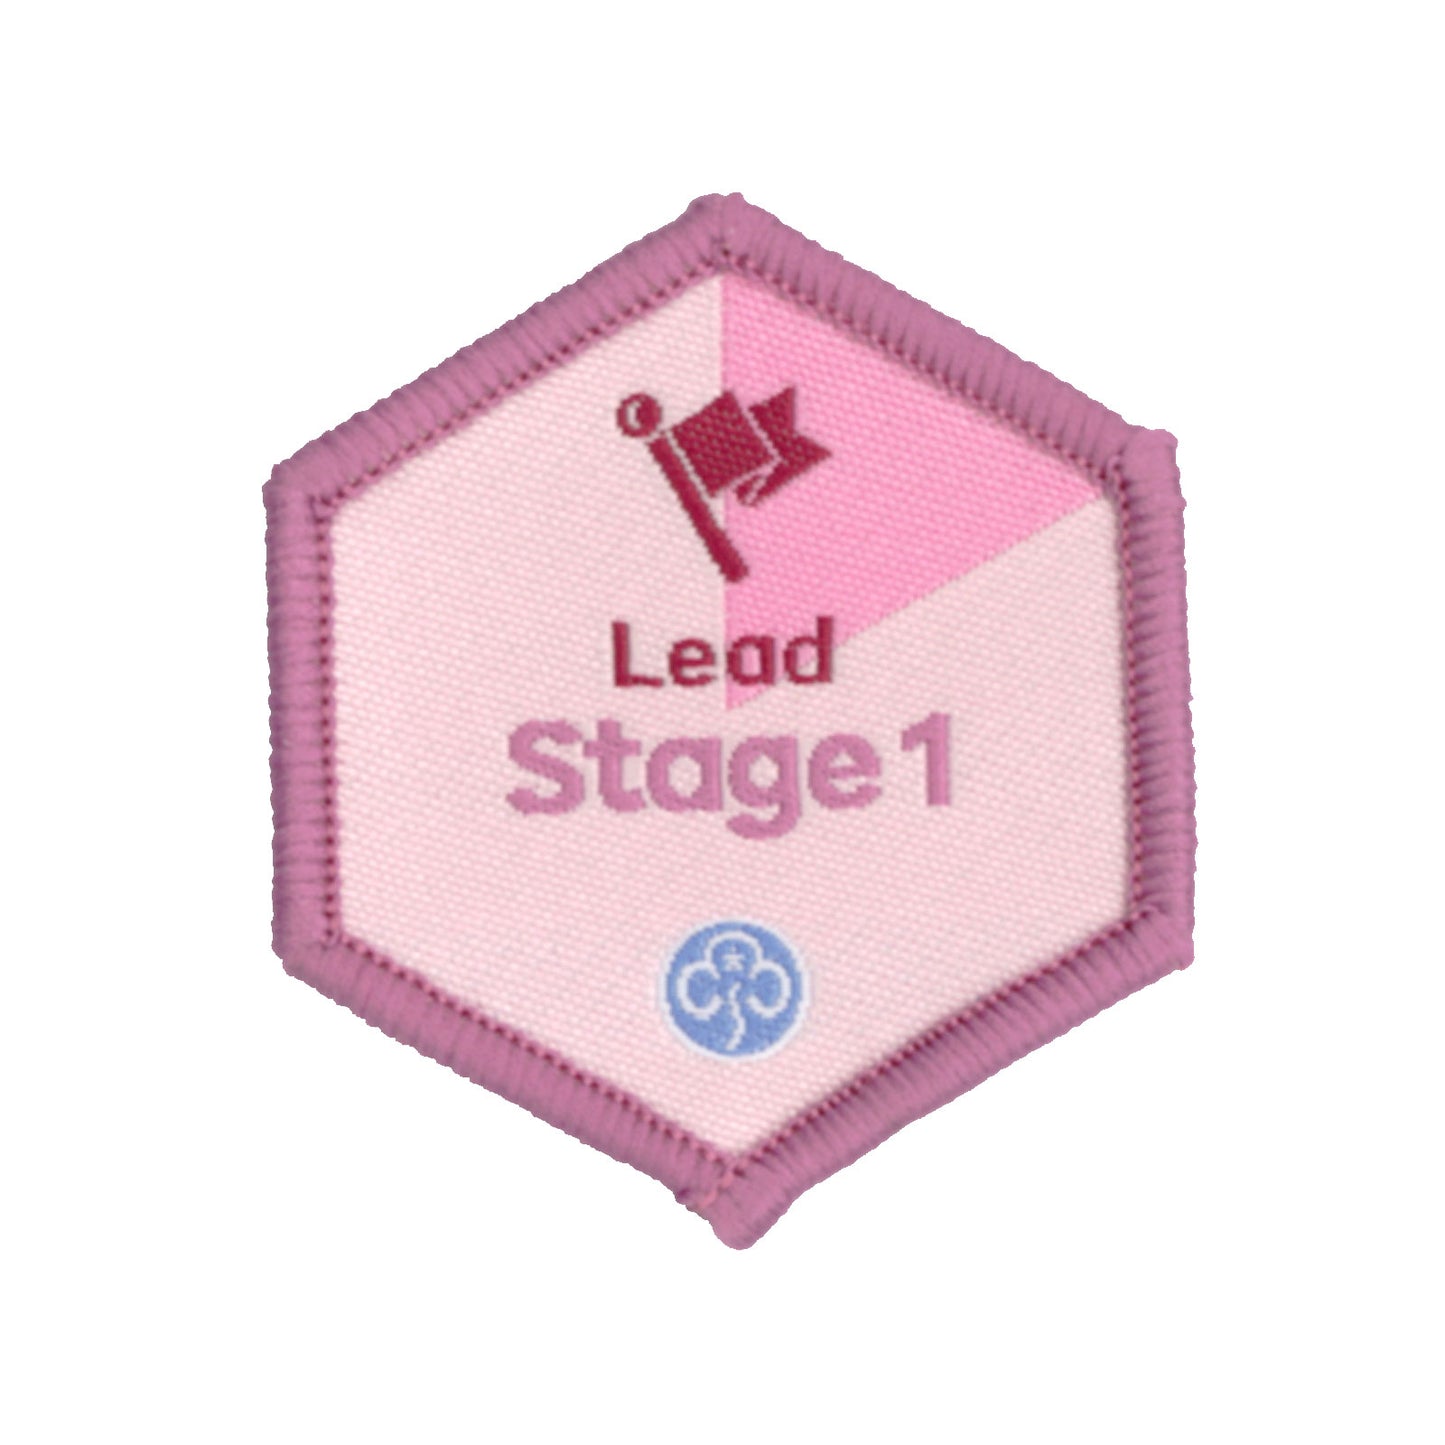 Skills Builder - Skills For My Future - Lead Stage 1 Woven Badge